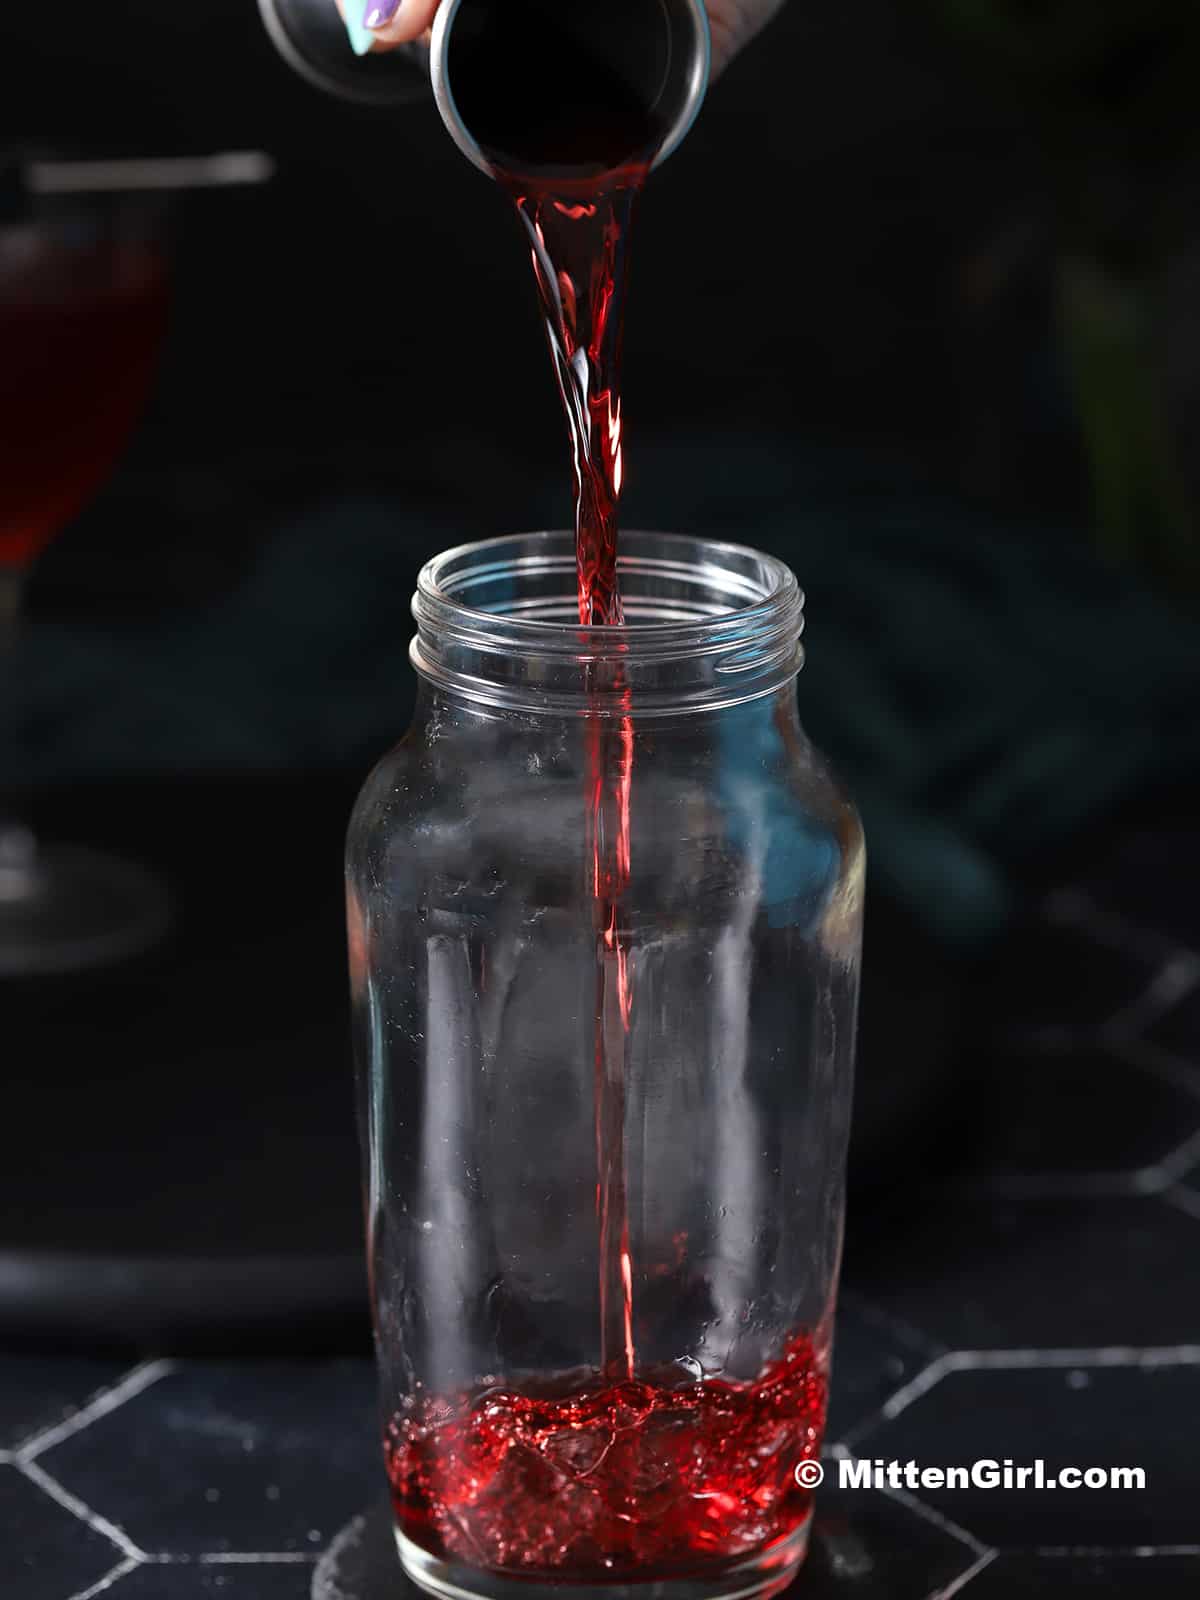 Cherry vodka being poured into a cocktail shaker.